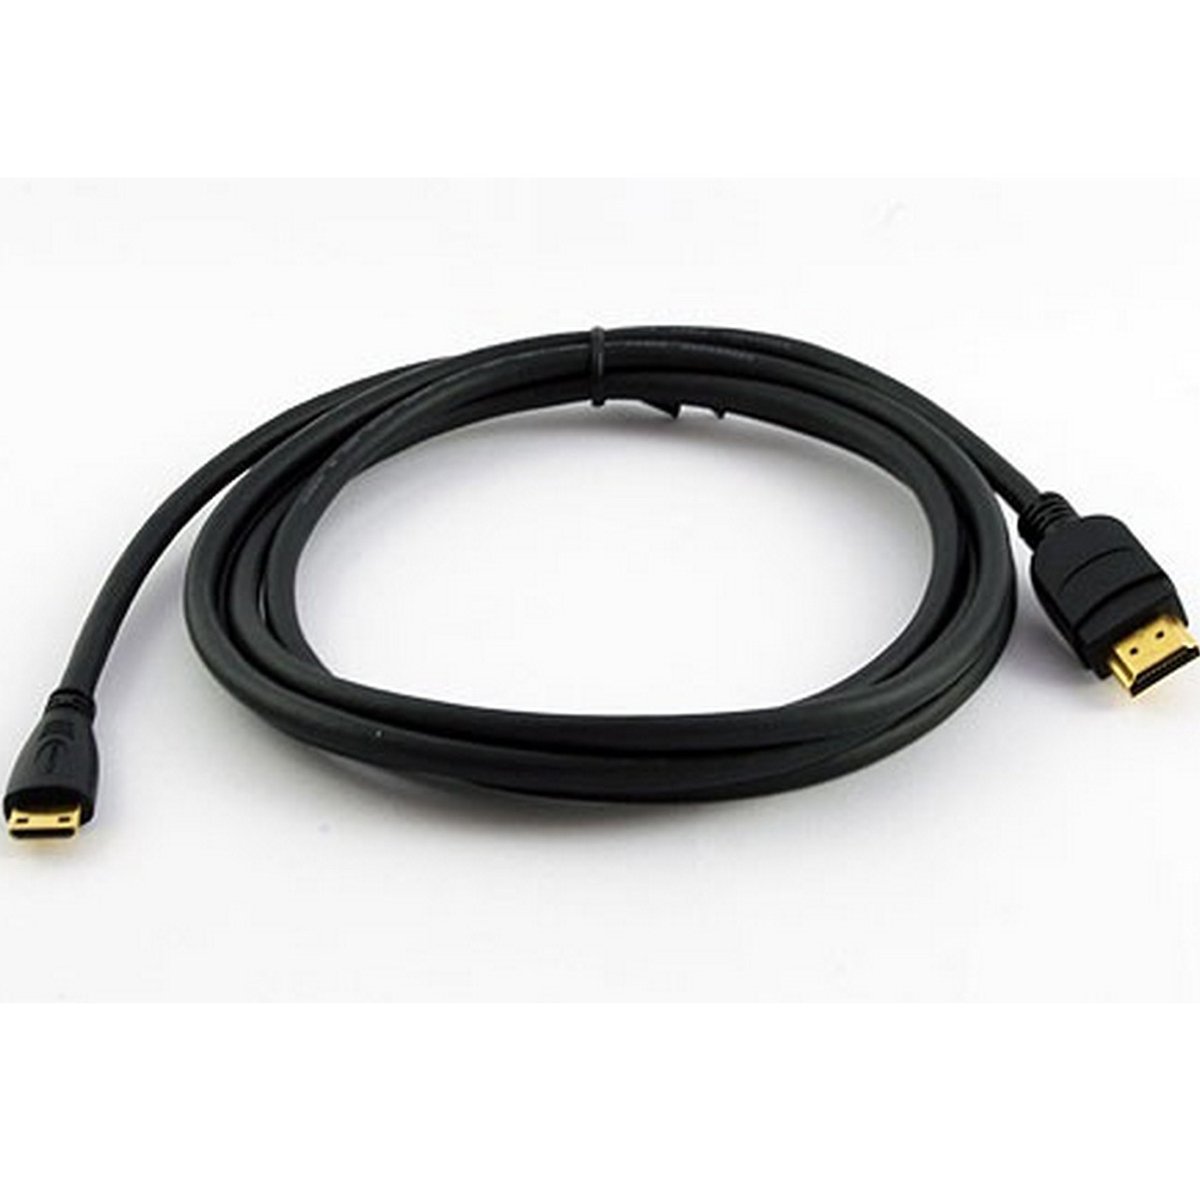 Iends HDMI Cable IE-CA7189 3Metre